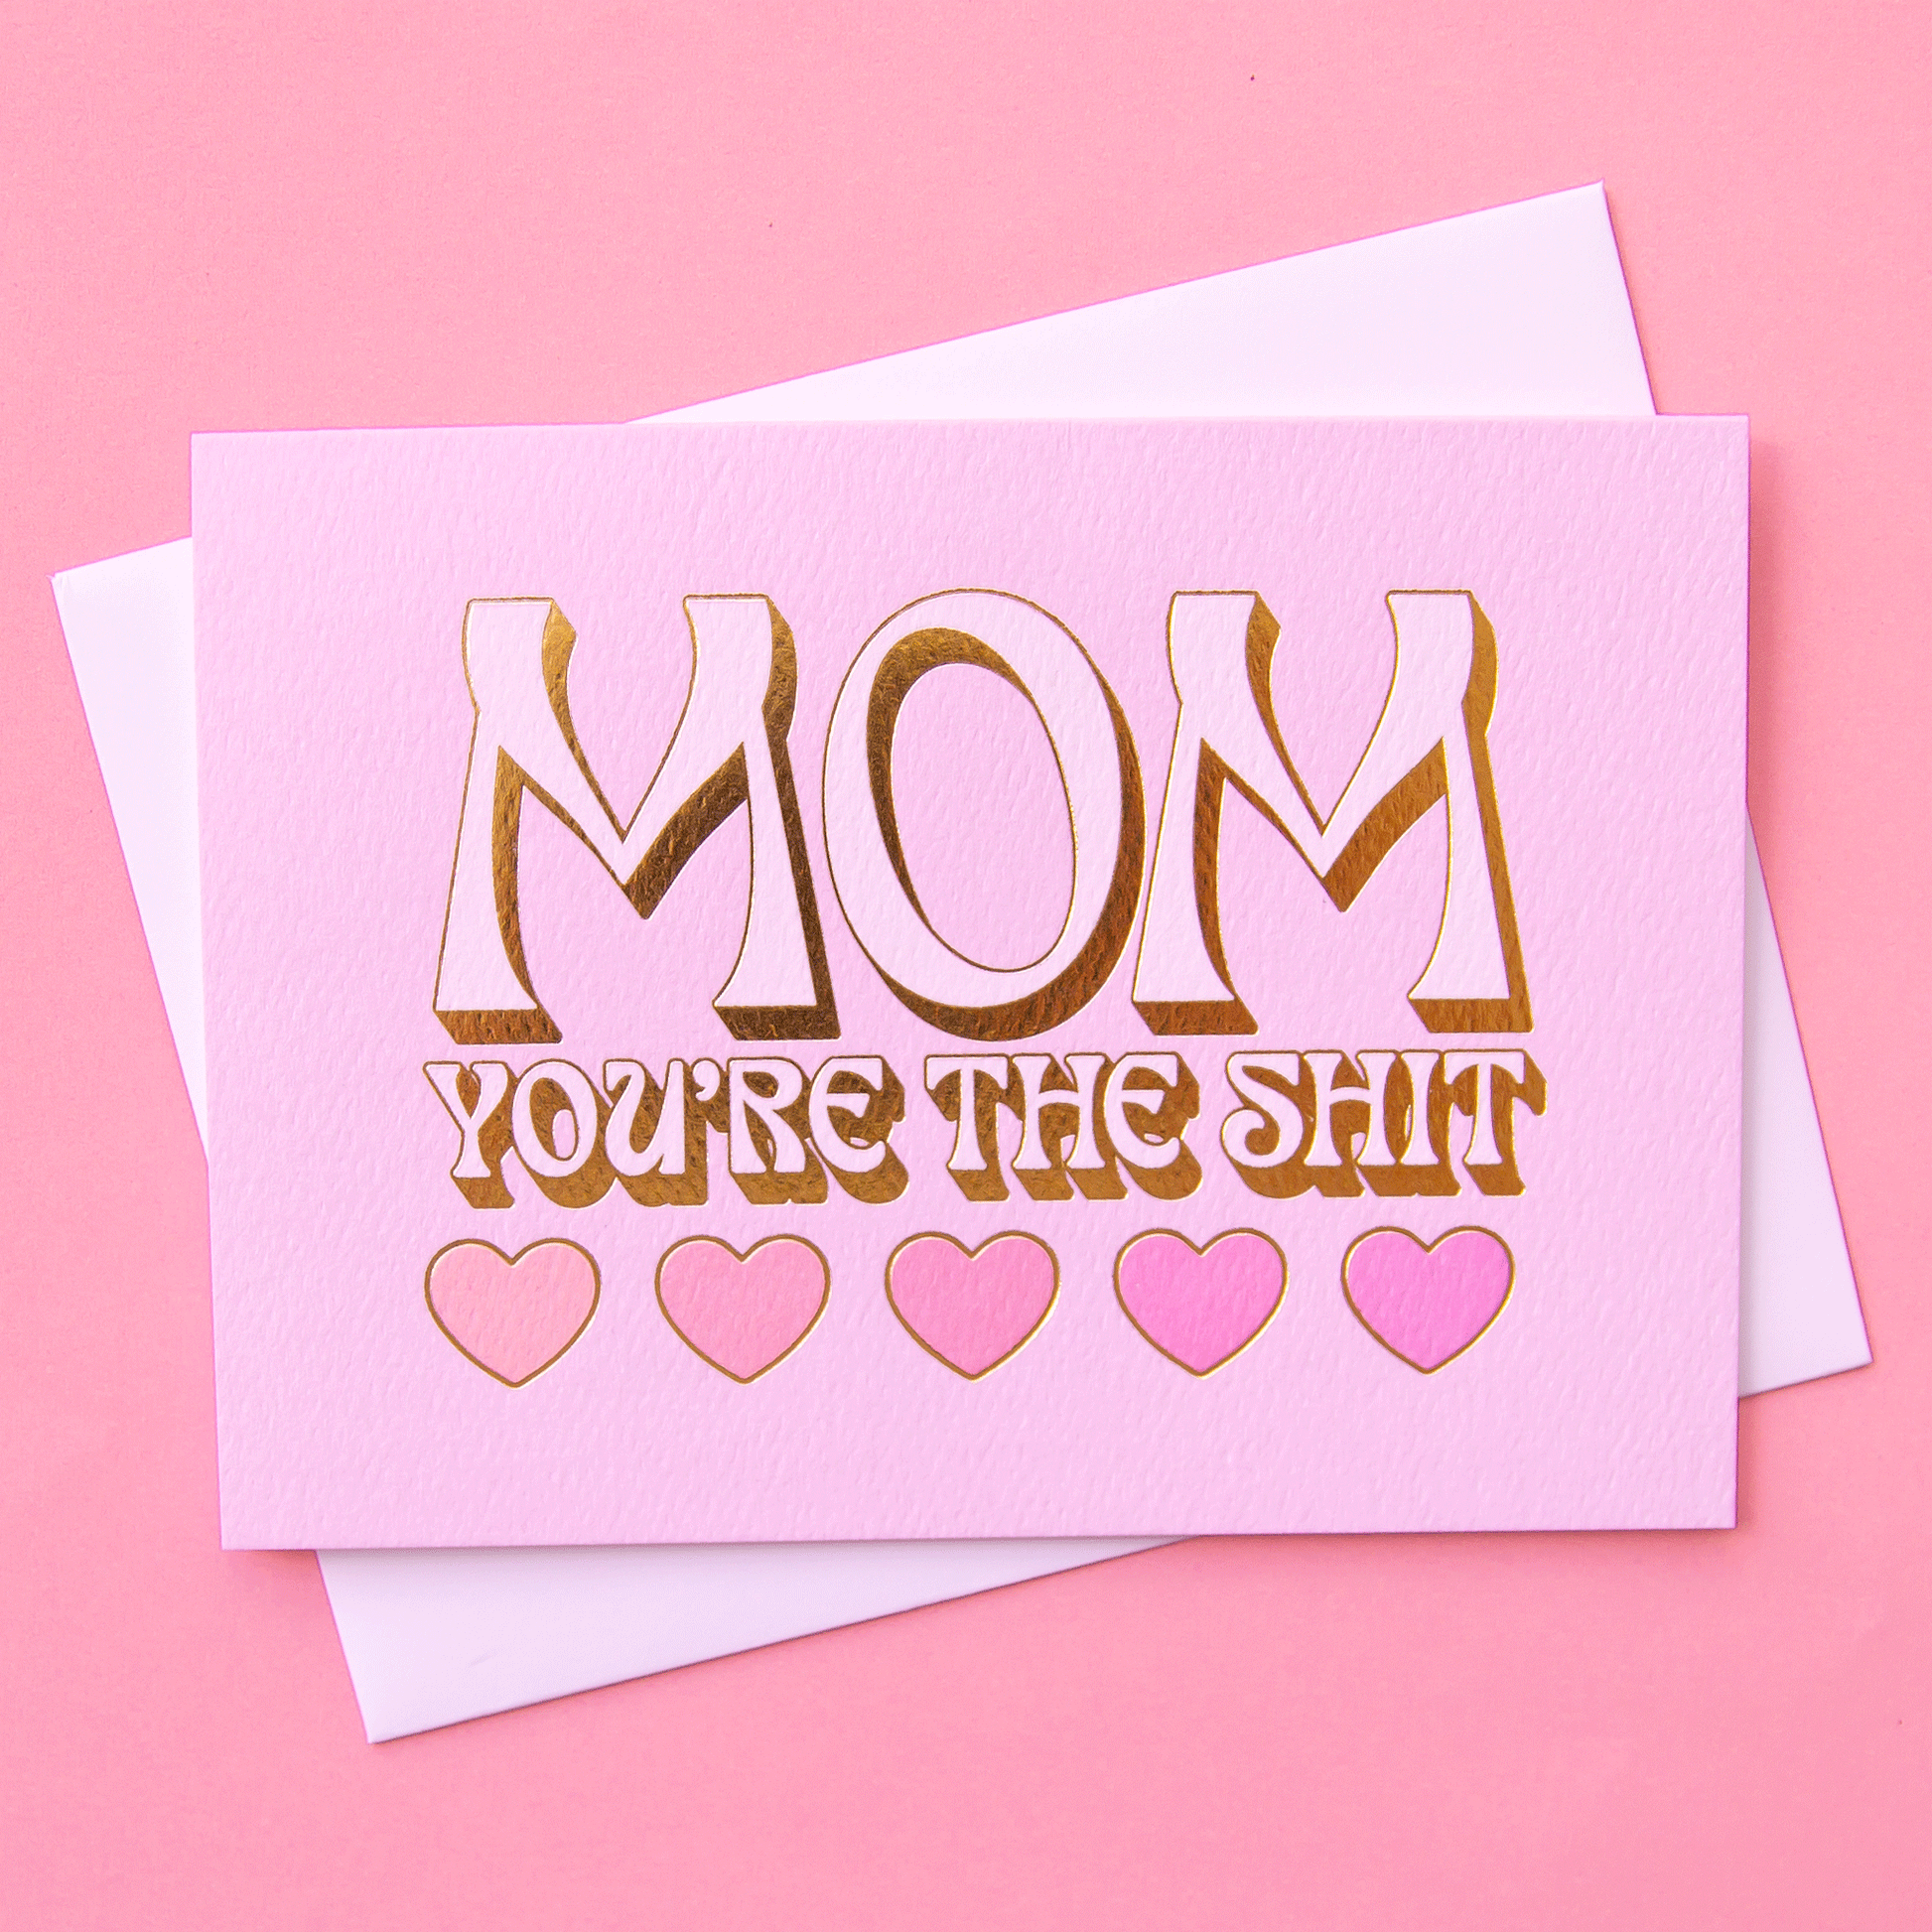 On a pink background is a pink card with heart shapes and text above that reads, "Mom You're The Shit".